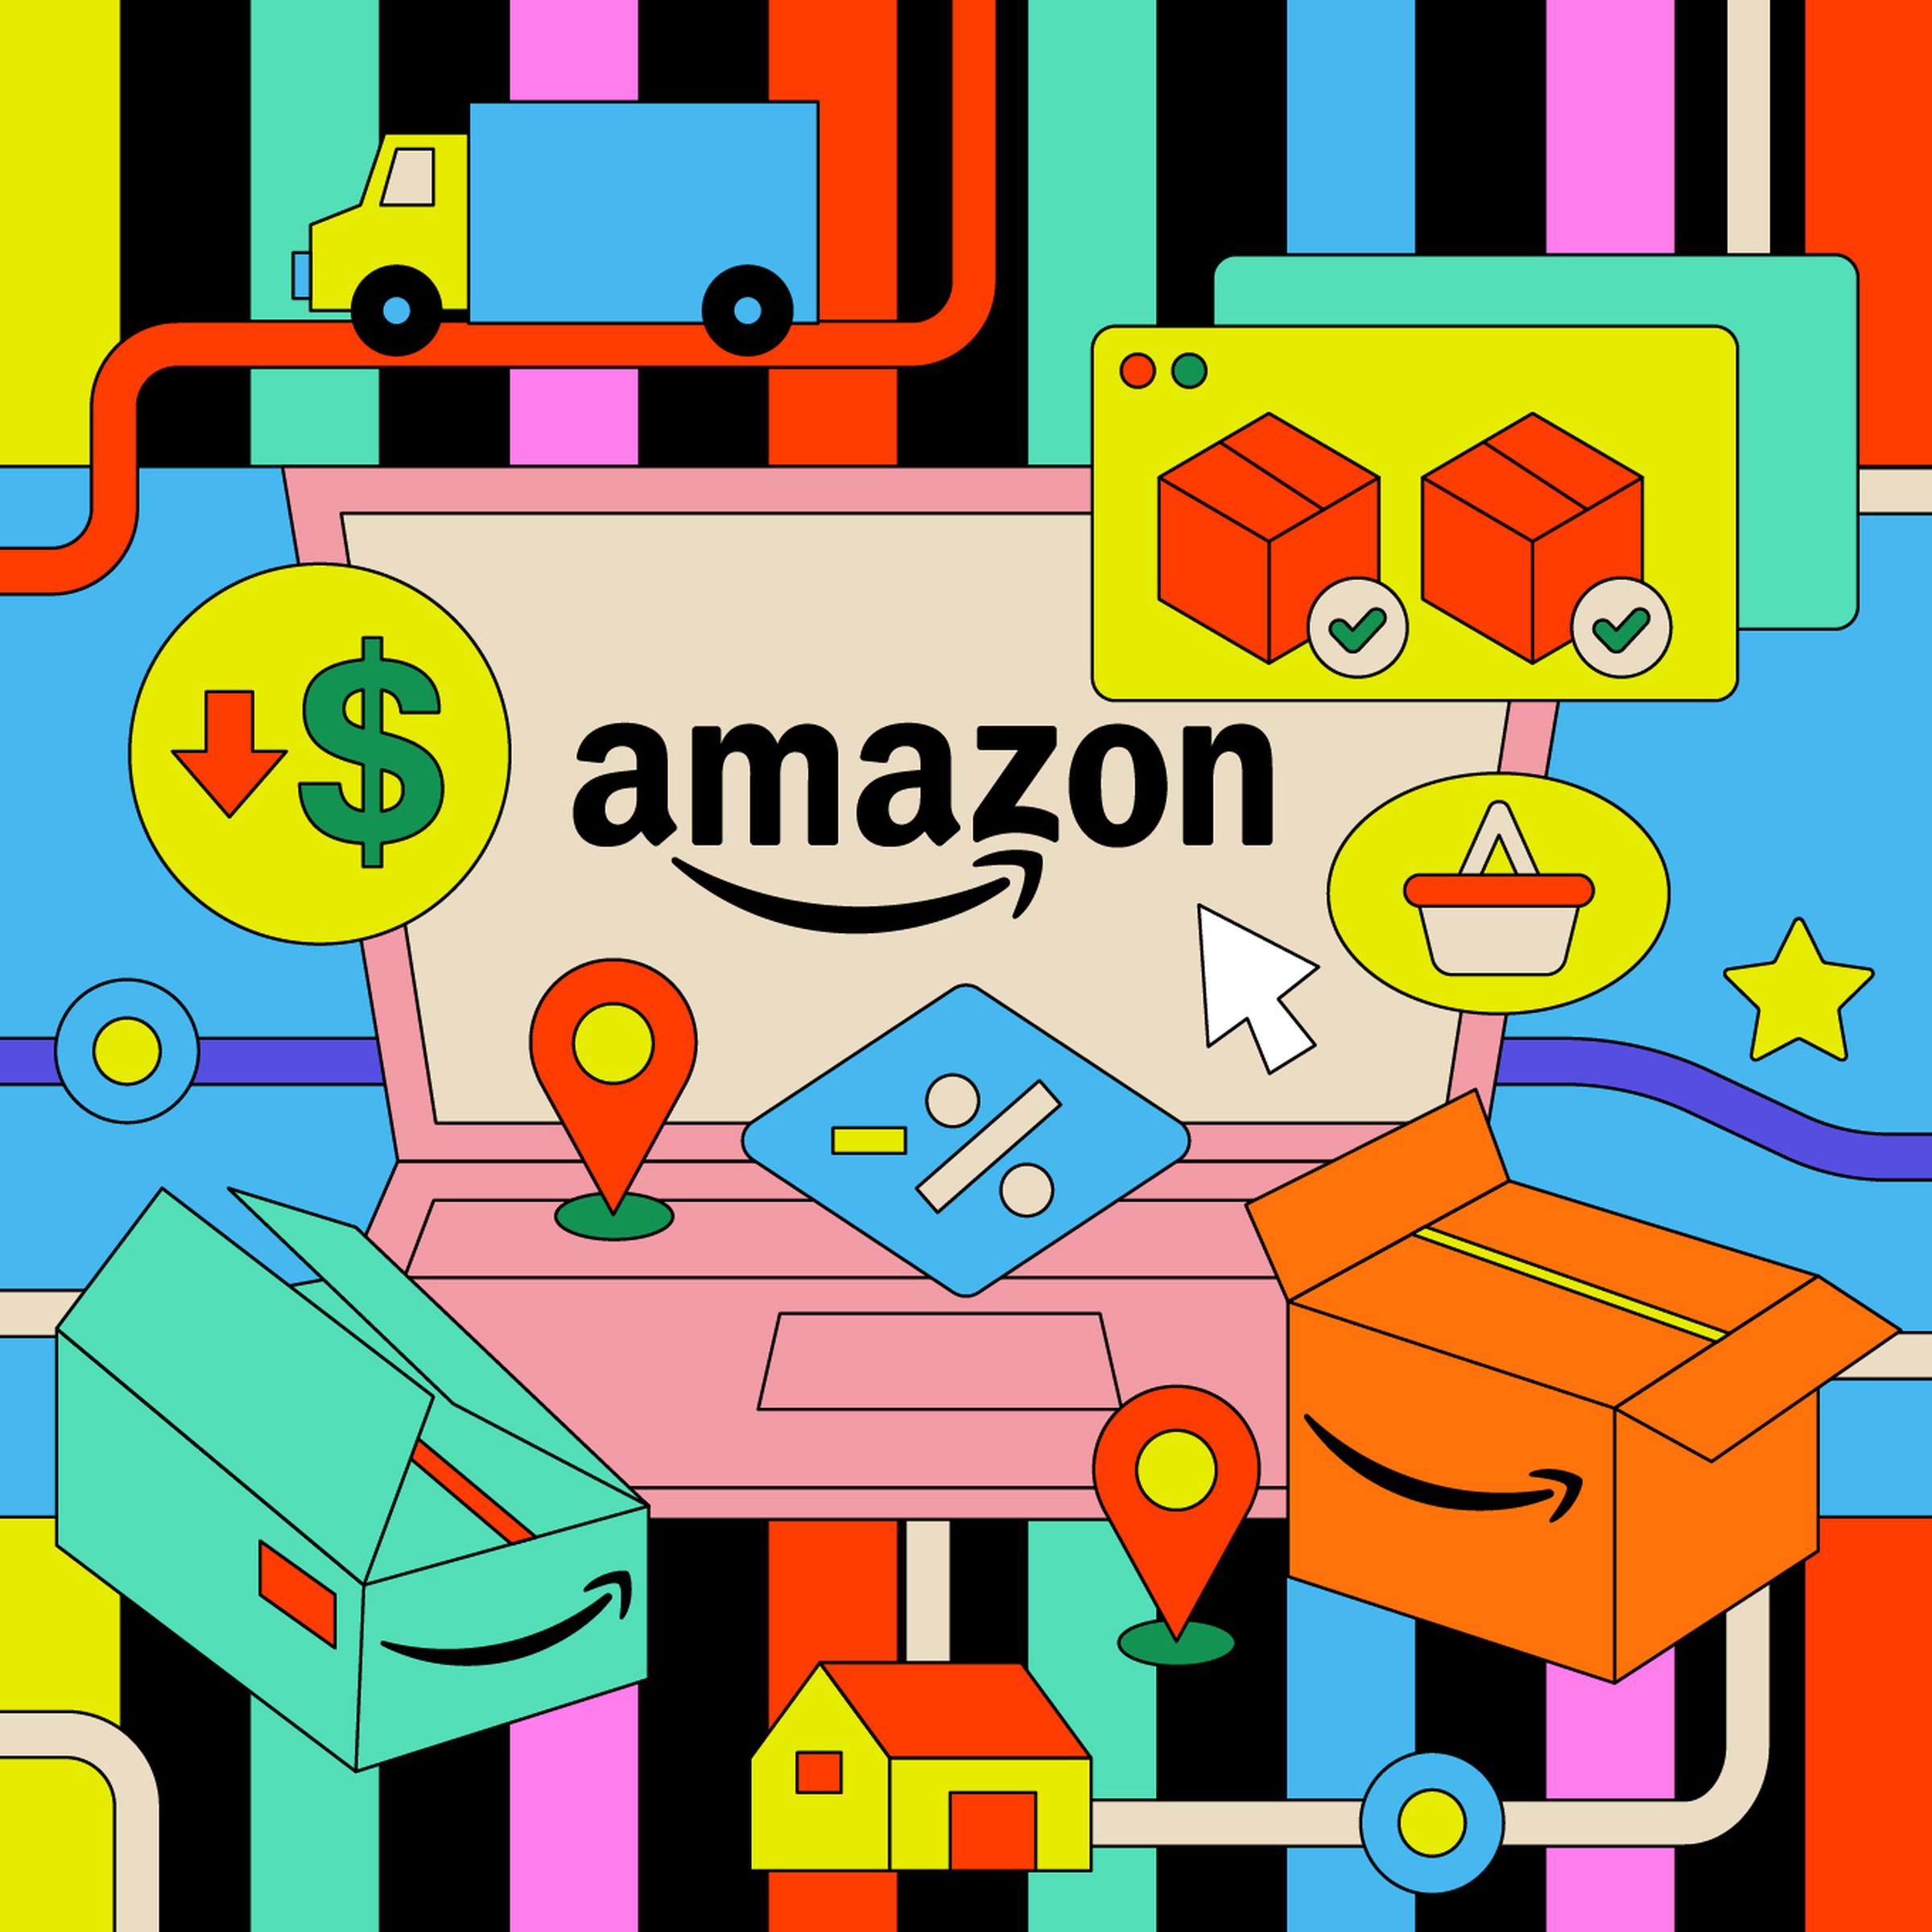 Colorful illustration of a computer with Amazon packages and delivery routes.